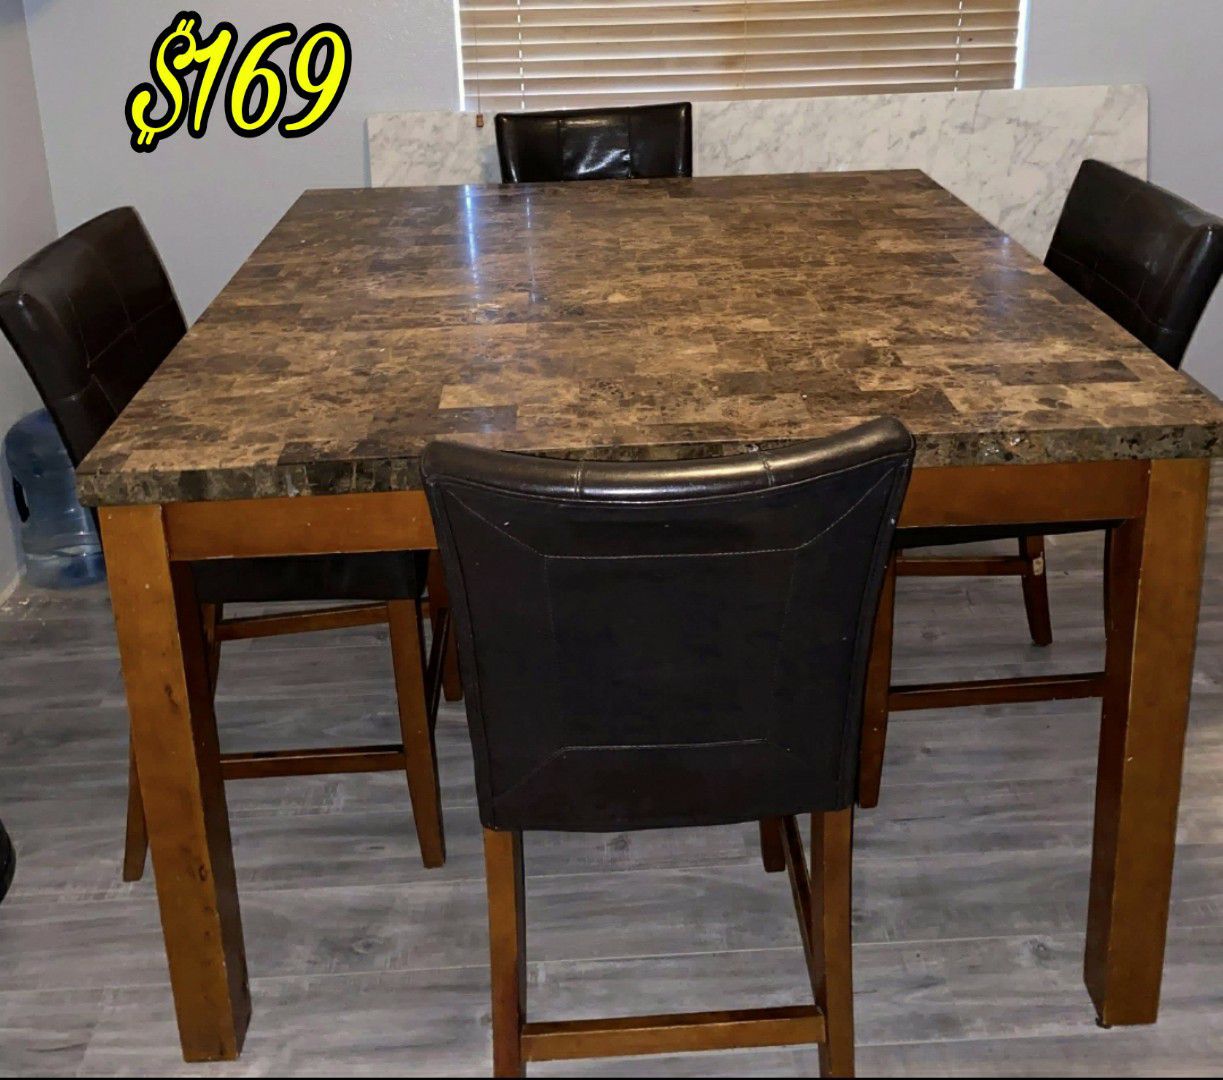 Good Condition Dining Table With Marble top Heavy Marble top Square Shape Fits 8 people Comes with 6 chairs only. Asking $169